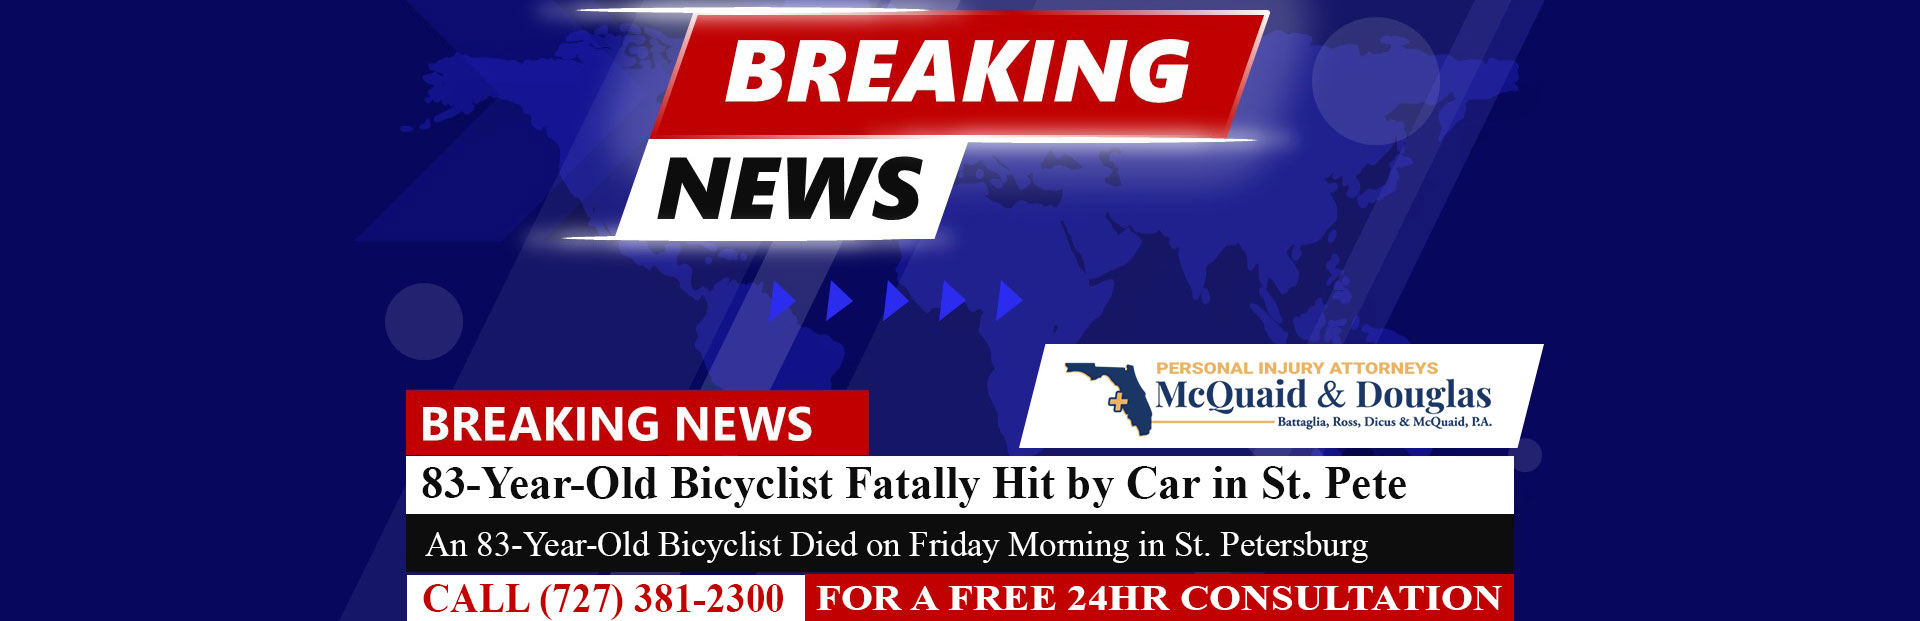 [07-07-24] 83-Year-Old Bicyclist Fatally Hit by Car in St. Pete